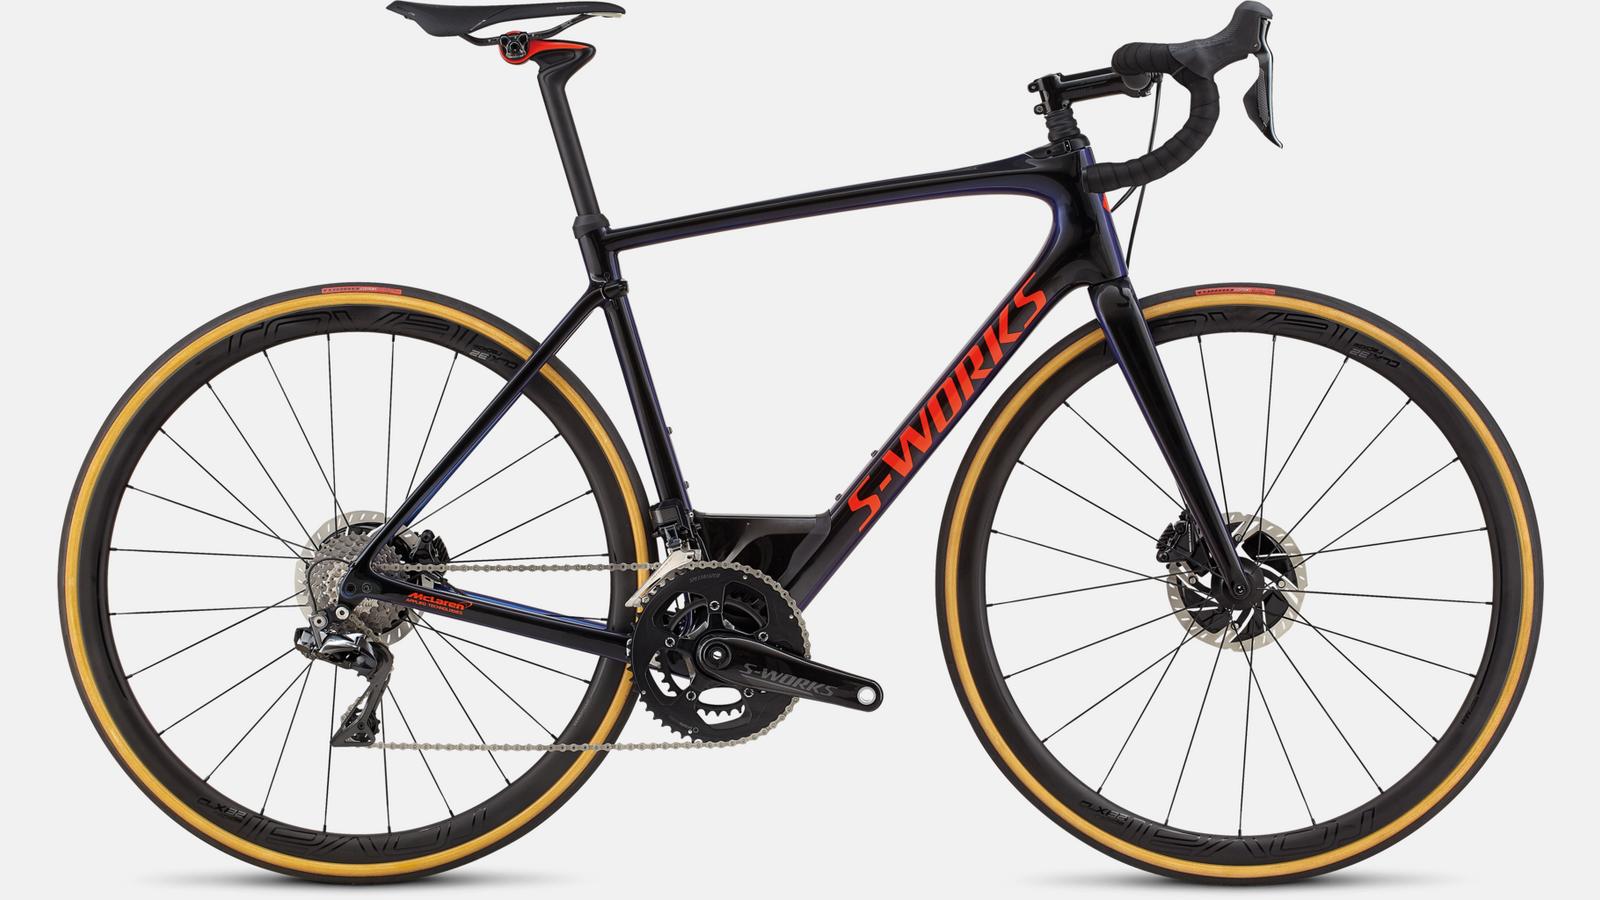 Paint for 2018 Specialized S-Works Roubaix Dura-Ace Di2 - Gloss Tarmac Black